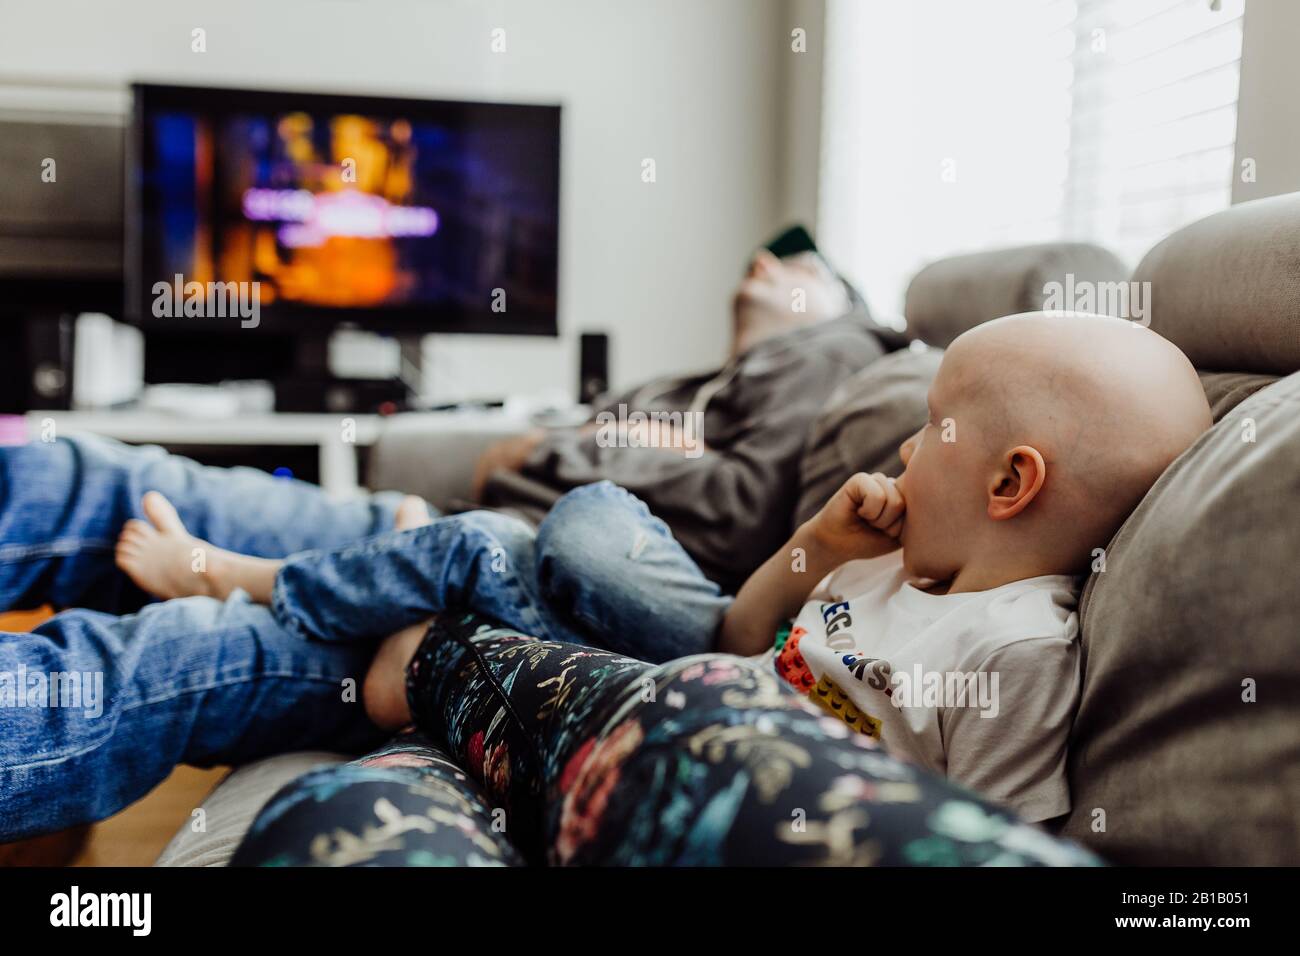 Family relaxing on couch watching tv while dad naps Stock Photo